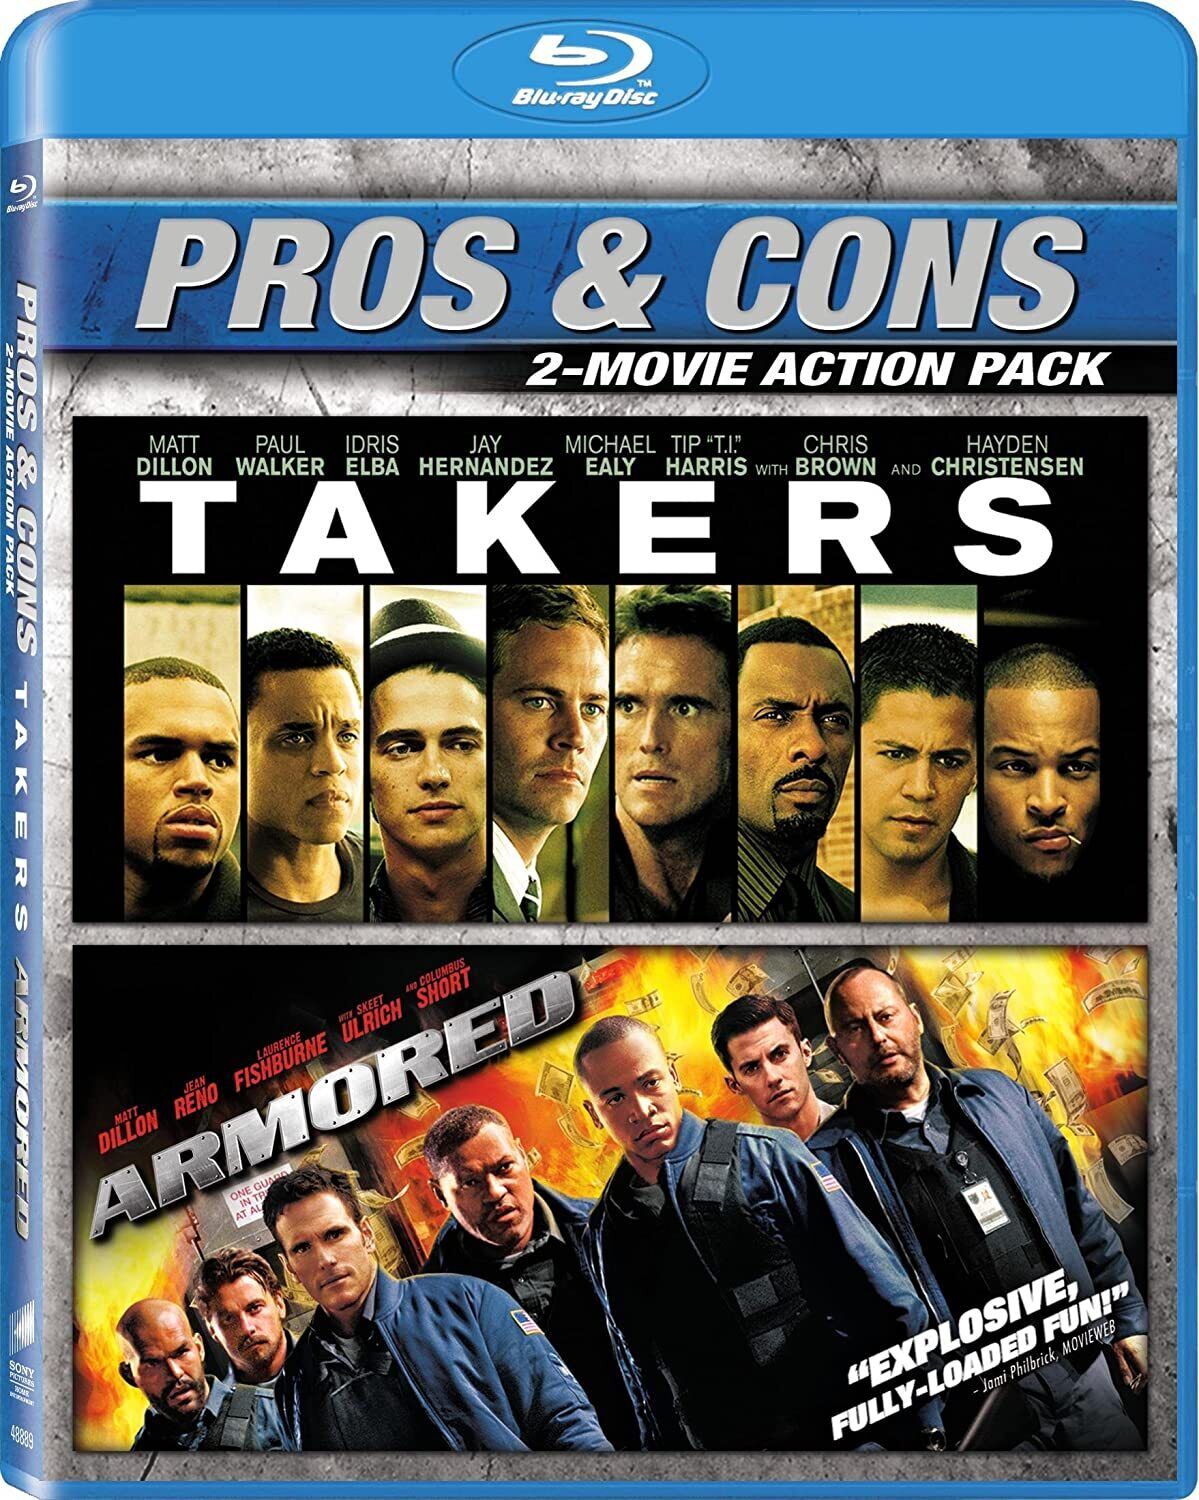 david janes recommends Takers Movie Online Free